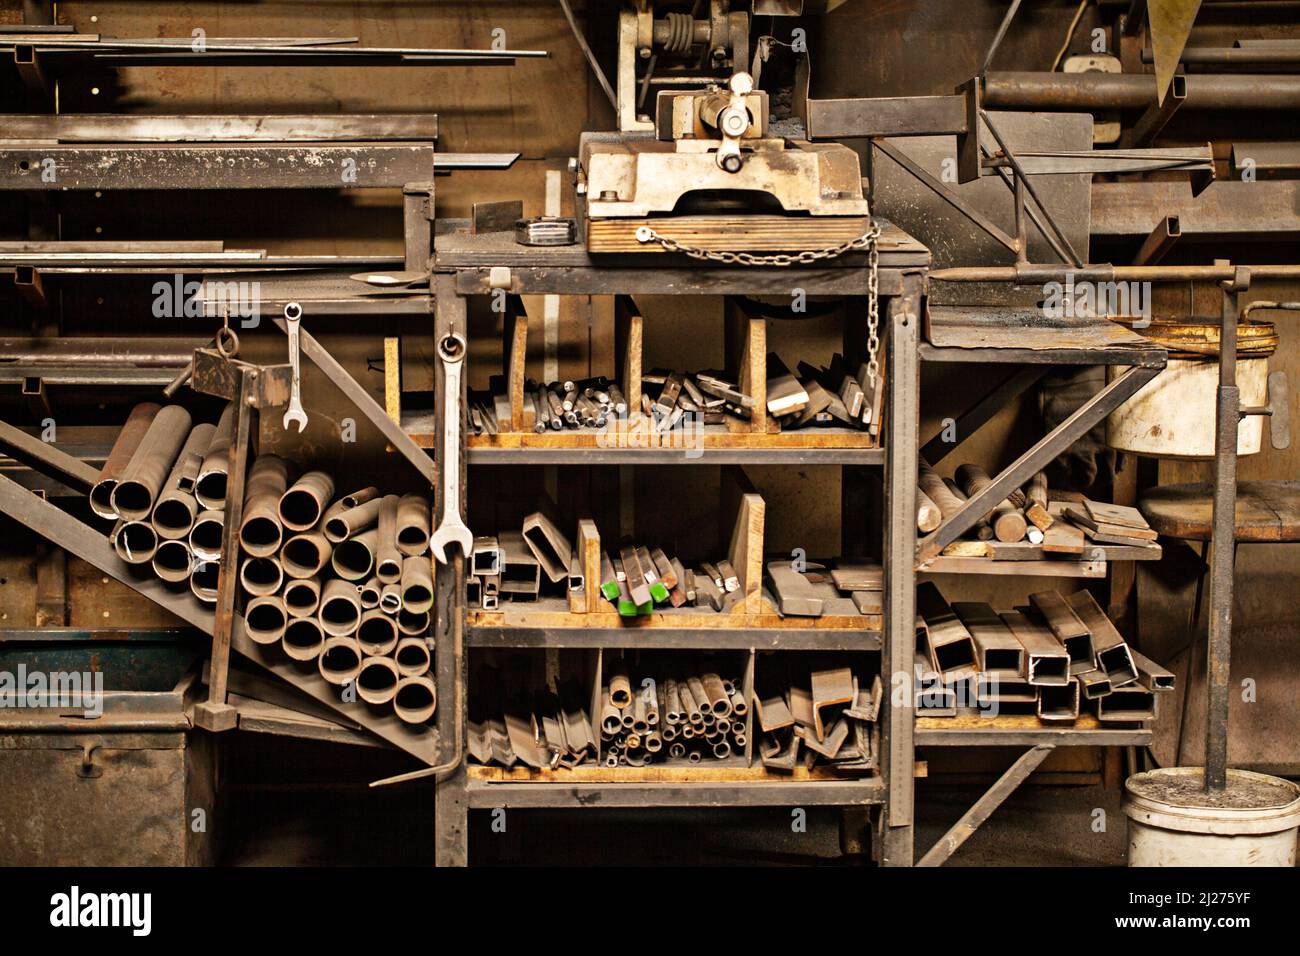 Filing, the workmans way. Shot of a metal craftsmans workshop filled with metal tools. Stock Photo